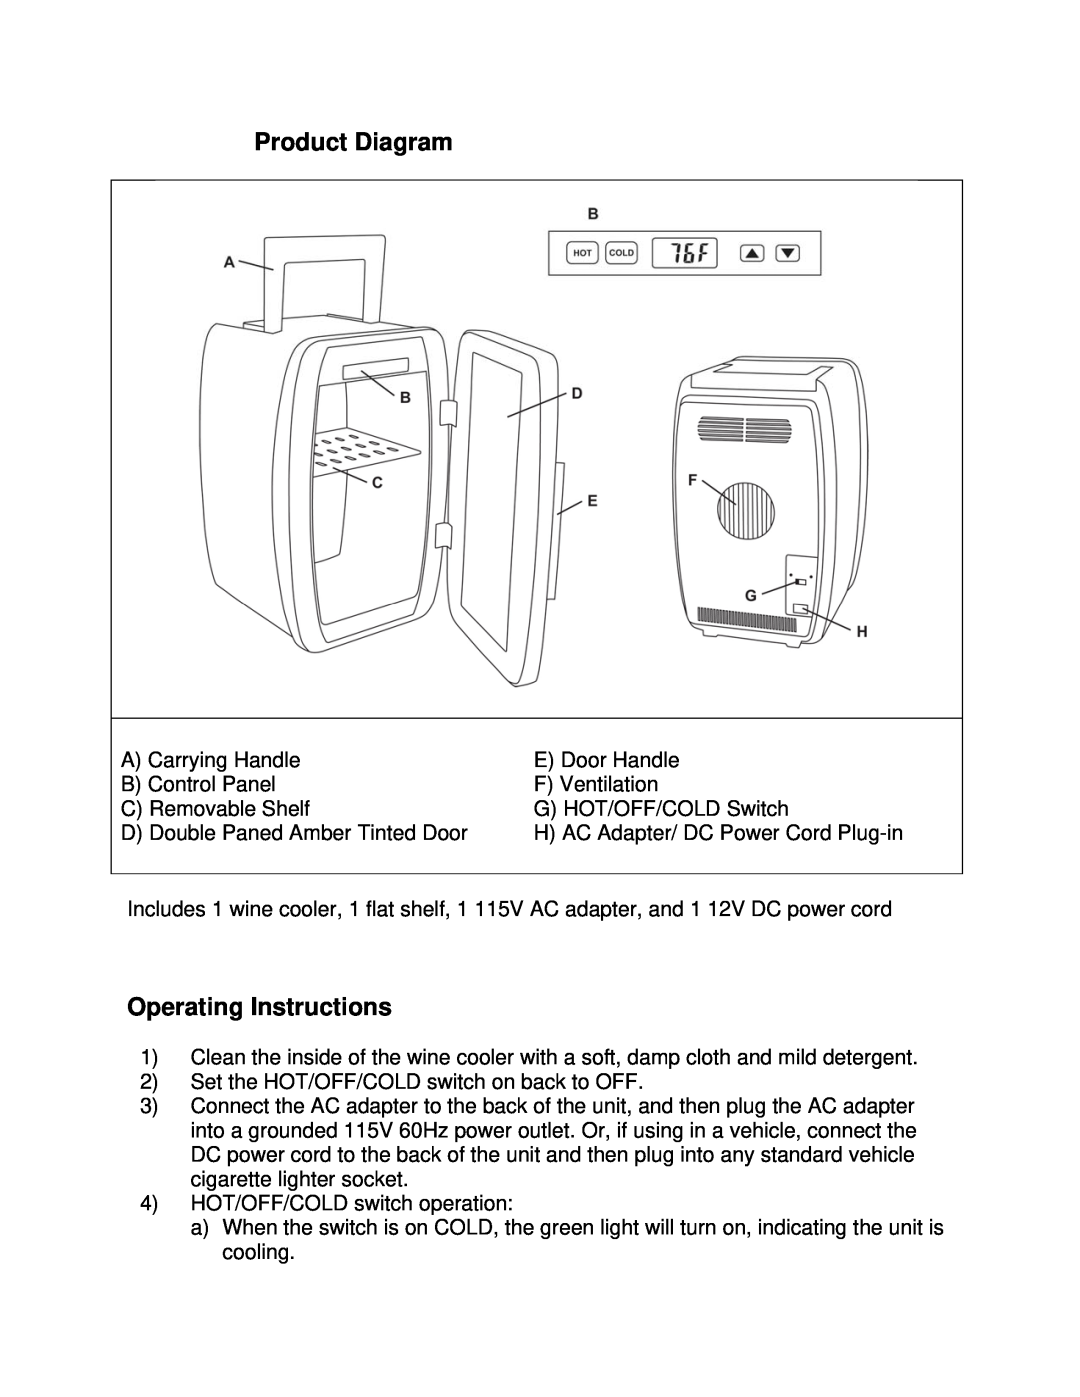 Soleus Air JC-4 owner manual Product Diagram, Operating Instructions 